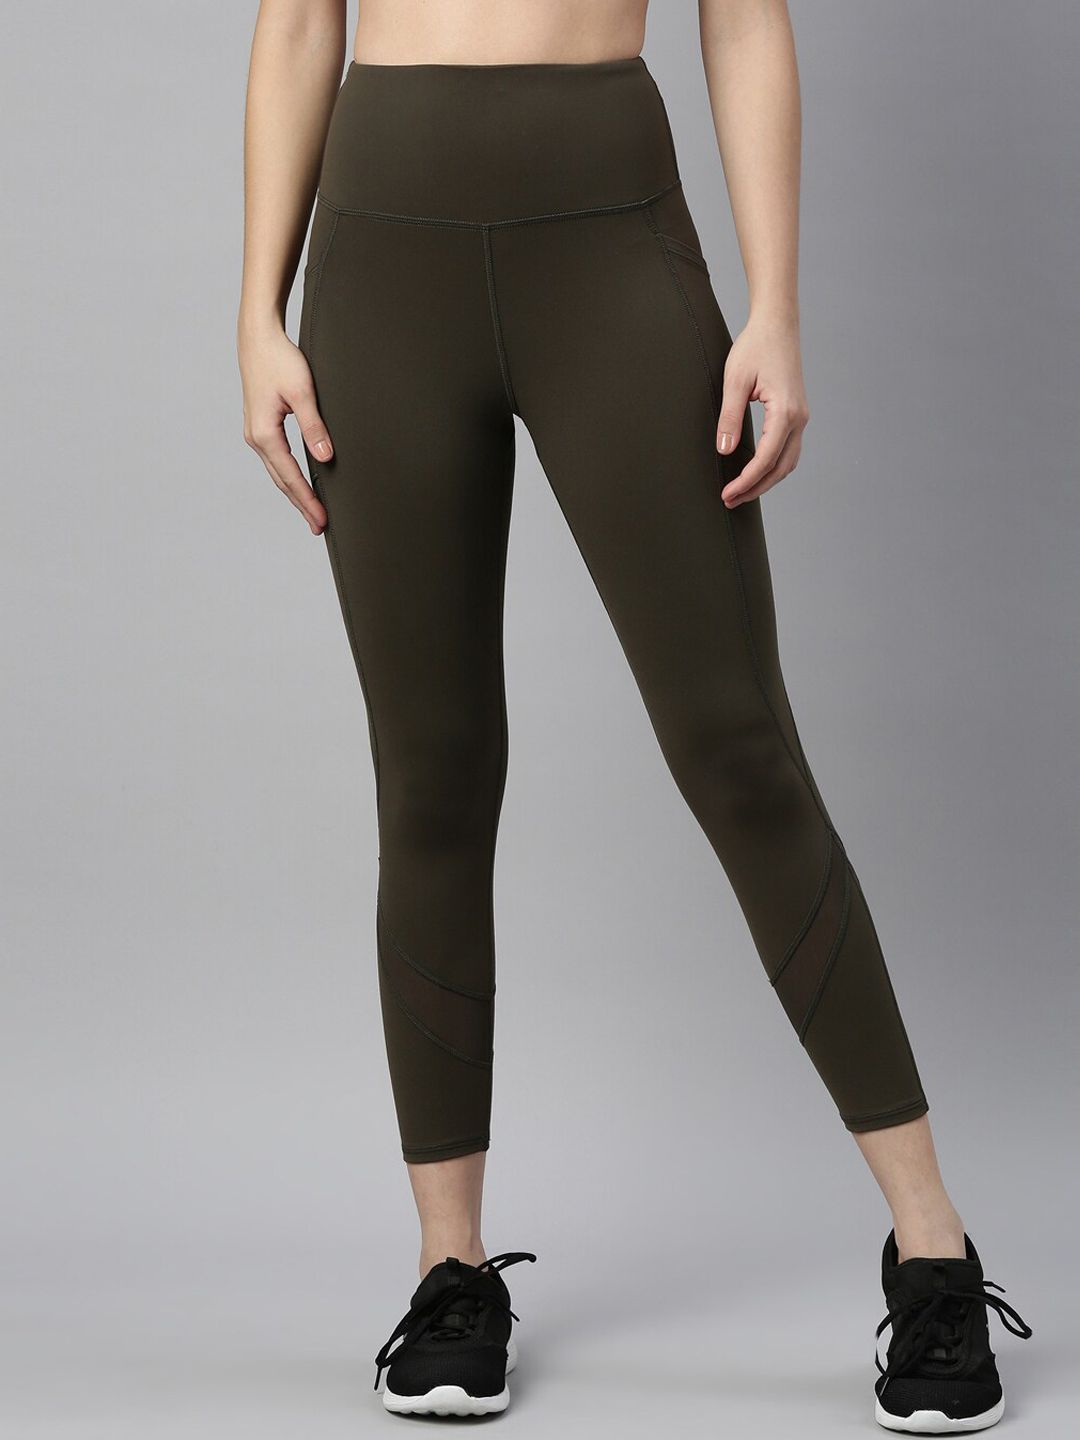 Enamor Women Olive Solid A601-Dry Fit Antimicrobial High Waist Leggings Price in India